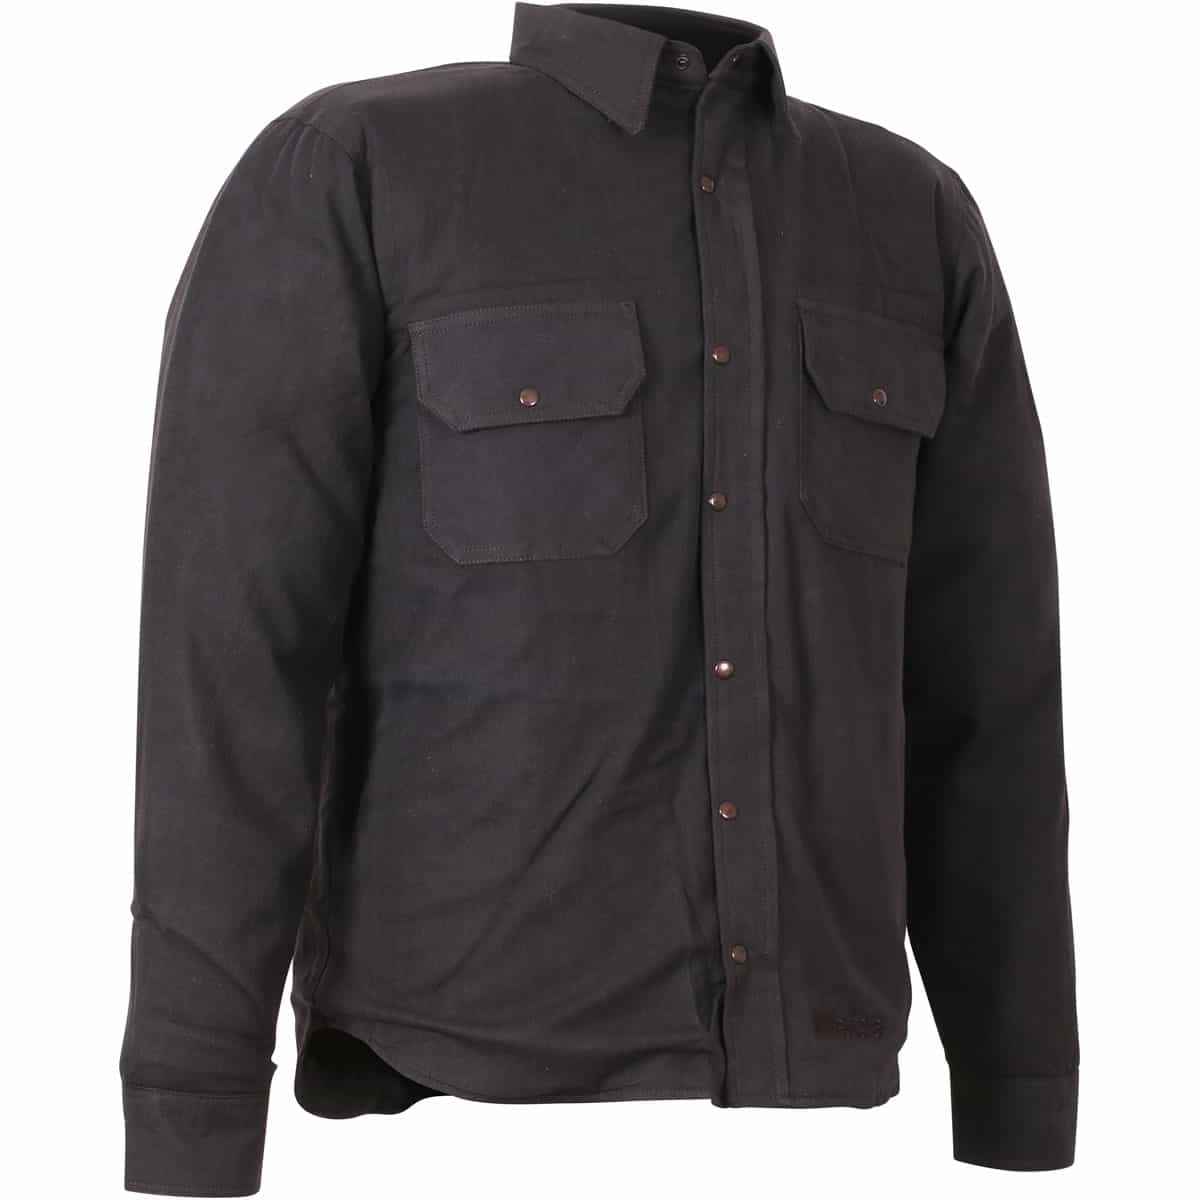 Weise Redwood Protective Shirt - Black right